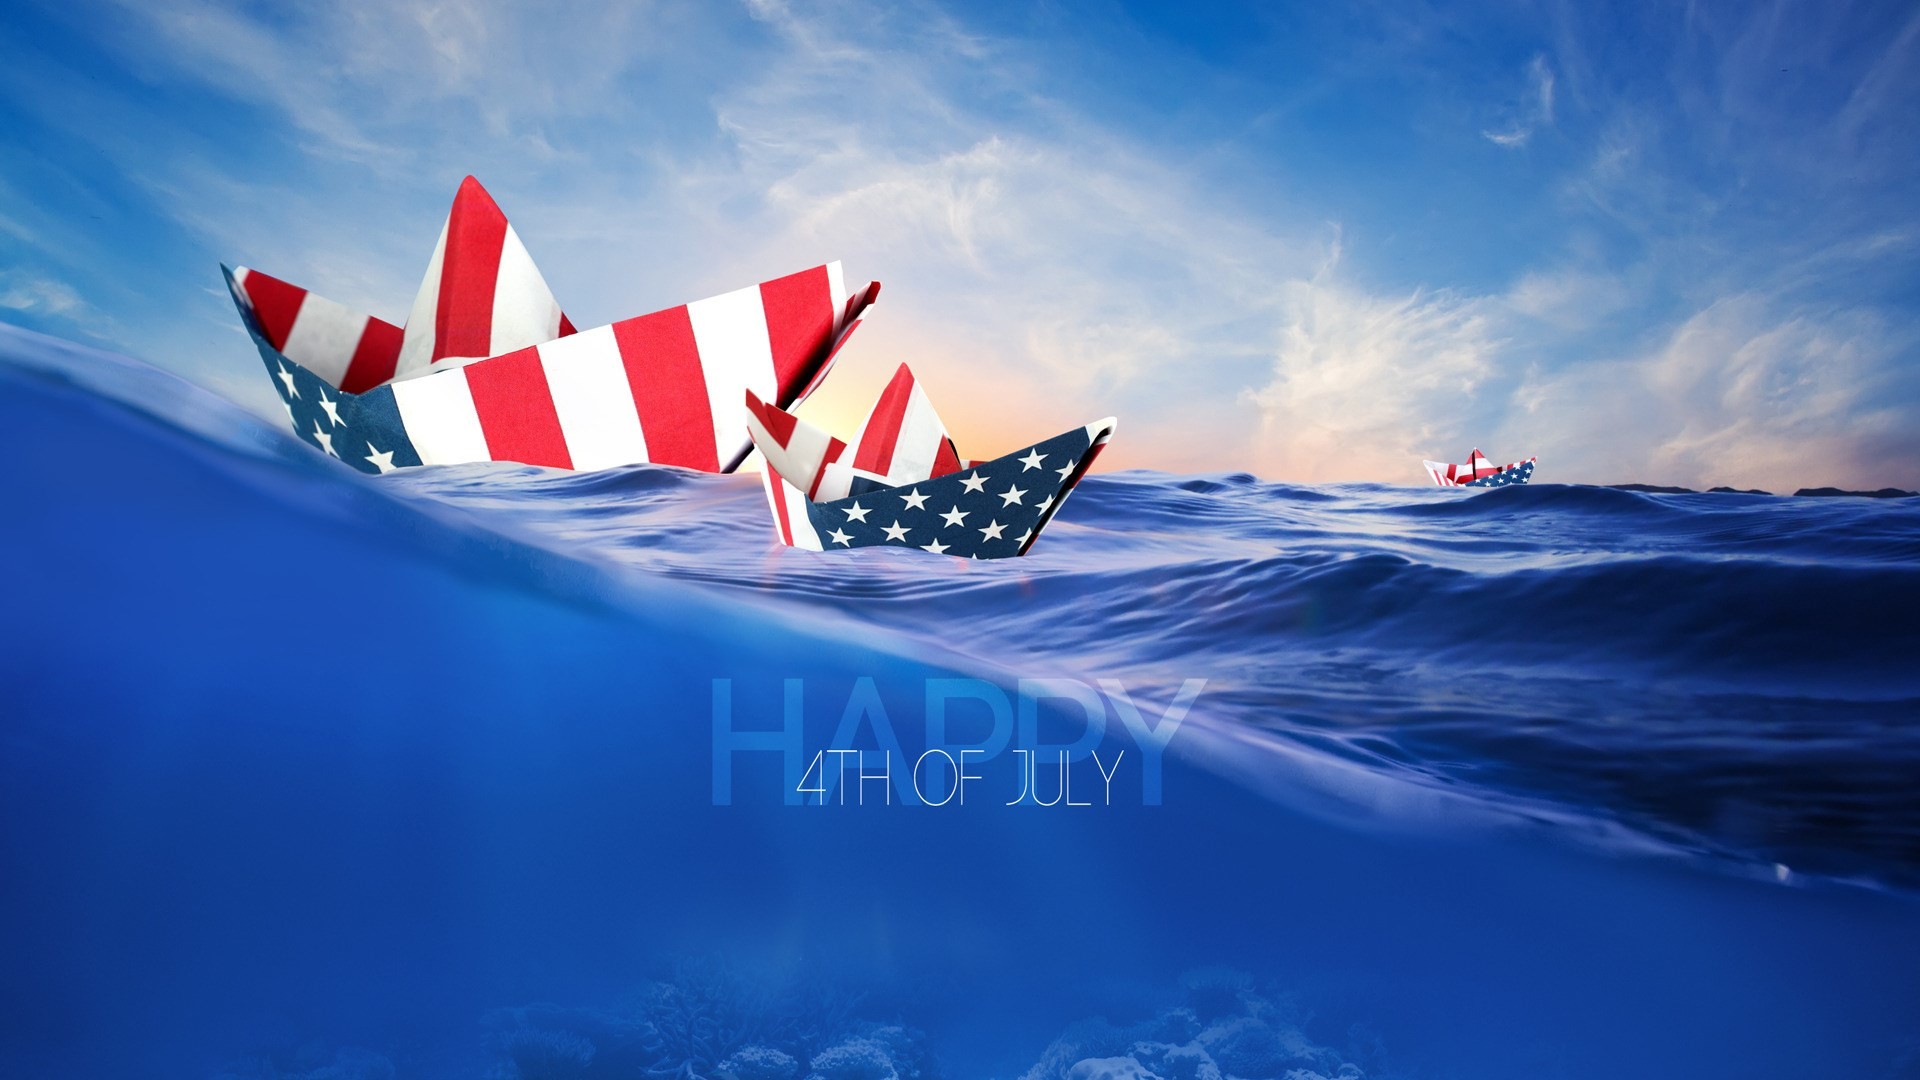 1920x1080 4th of july wallpaper free download | ololoshenka | Pinterest | Wallpaper  free download